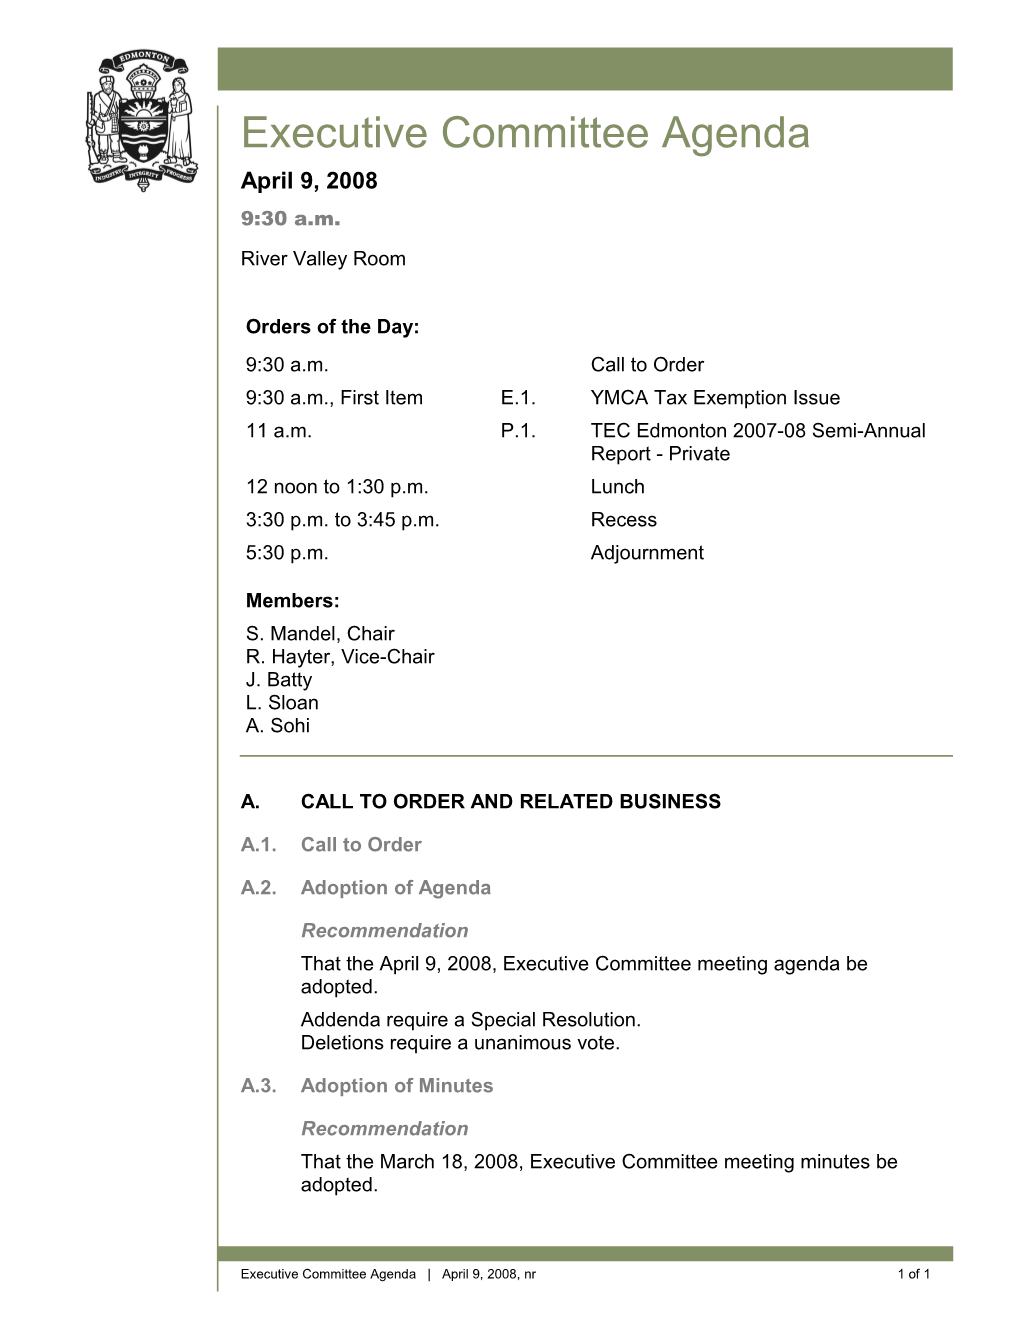 Agenda for Executive Committee April 9, 2008 Meeting